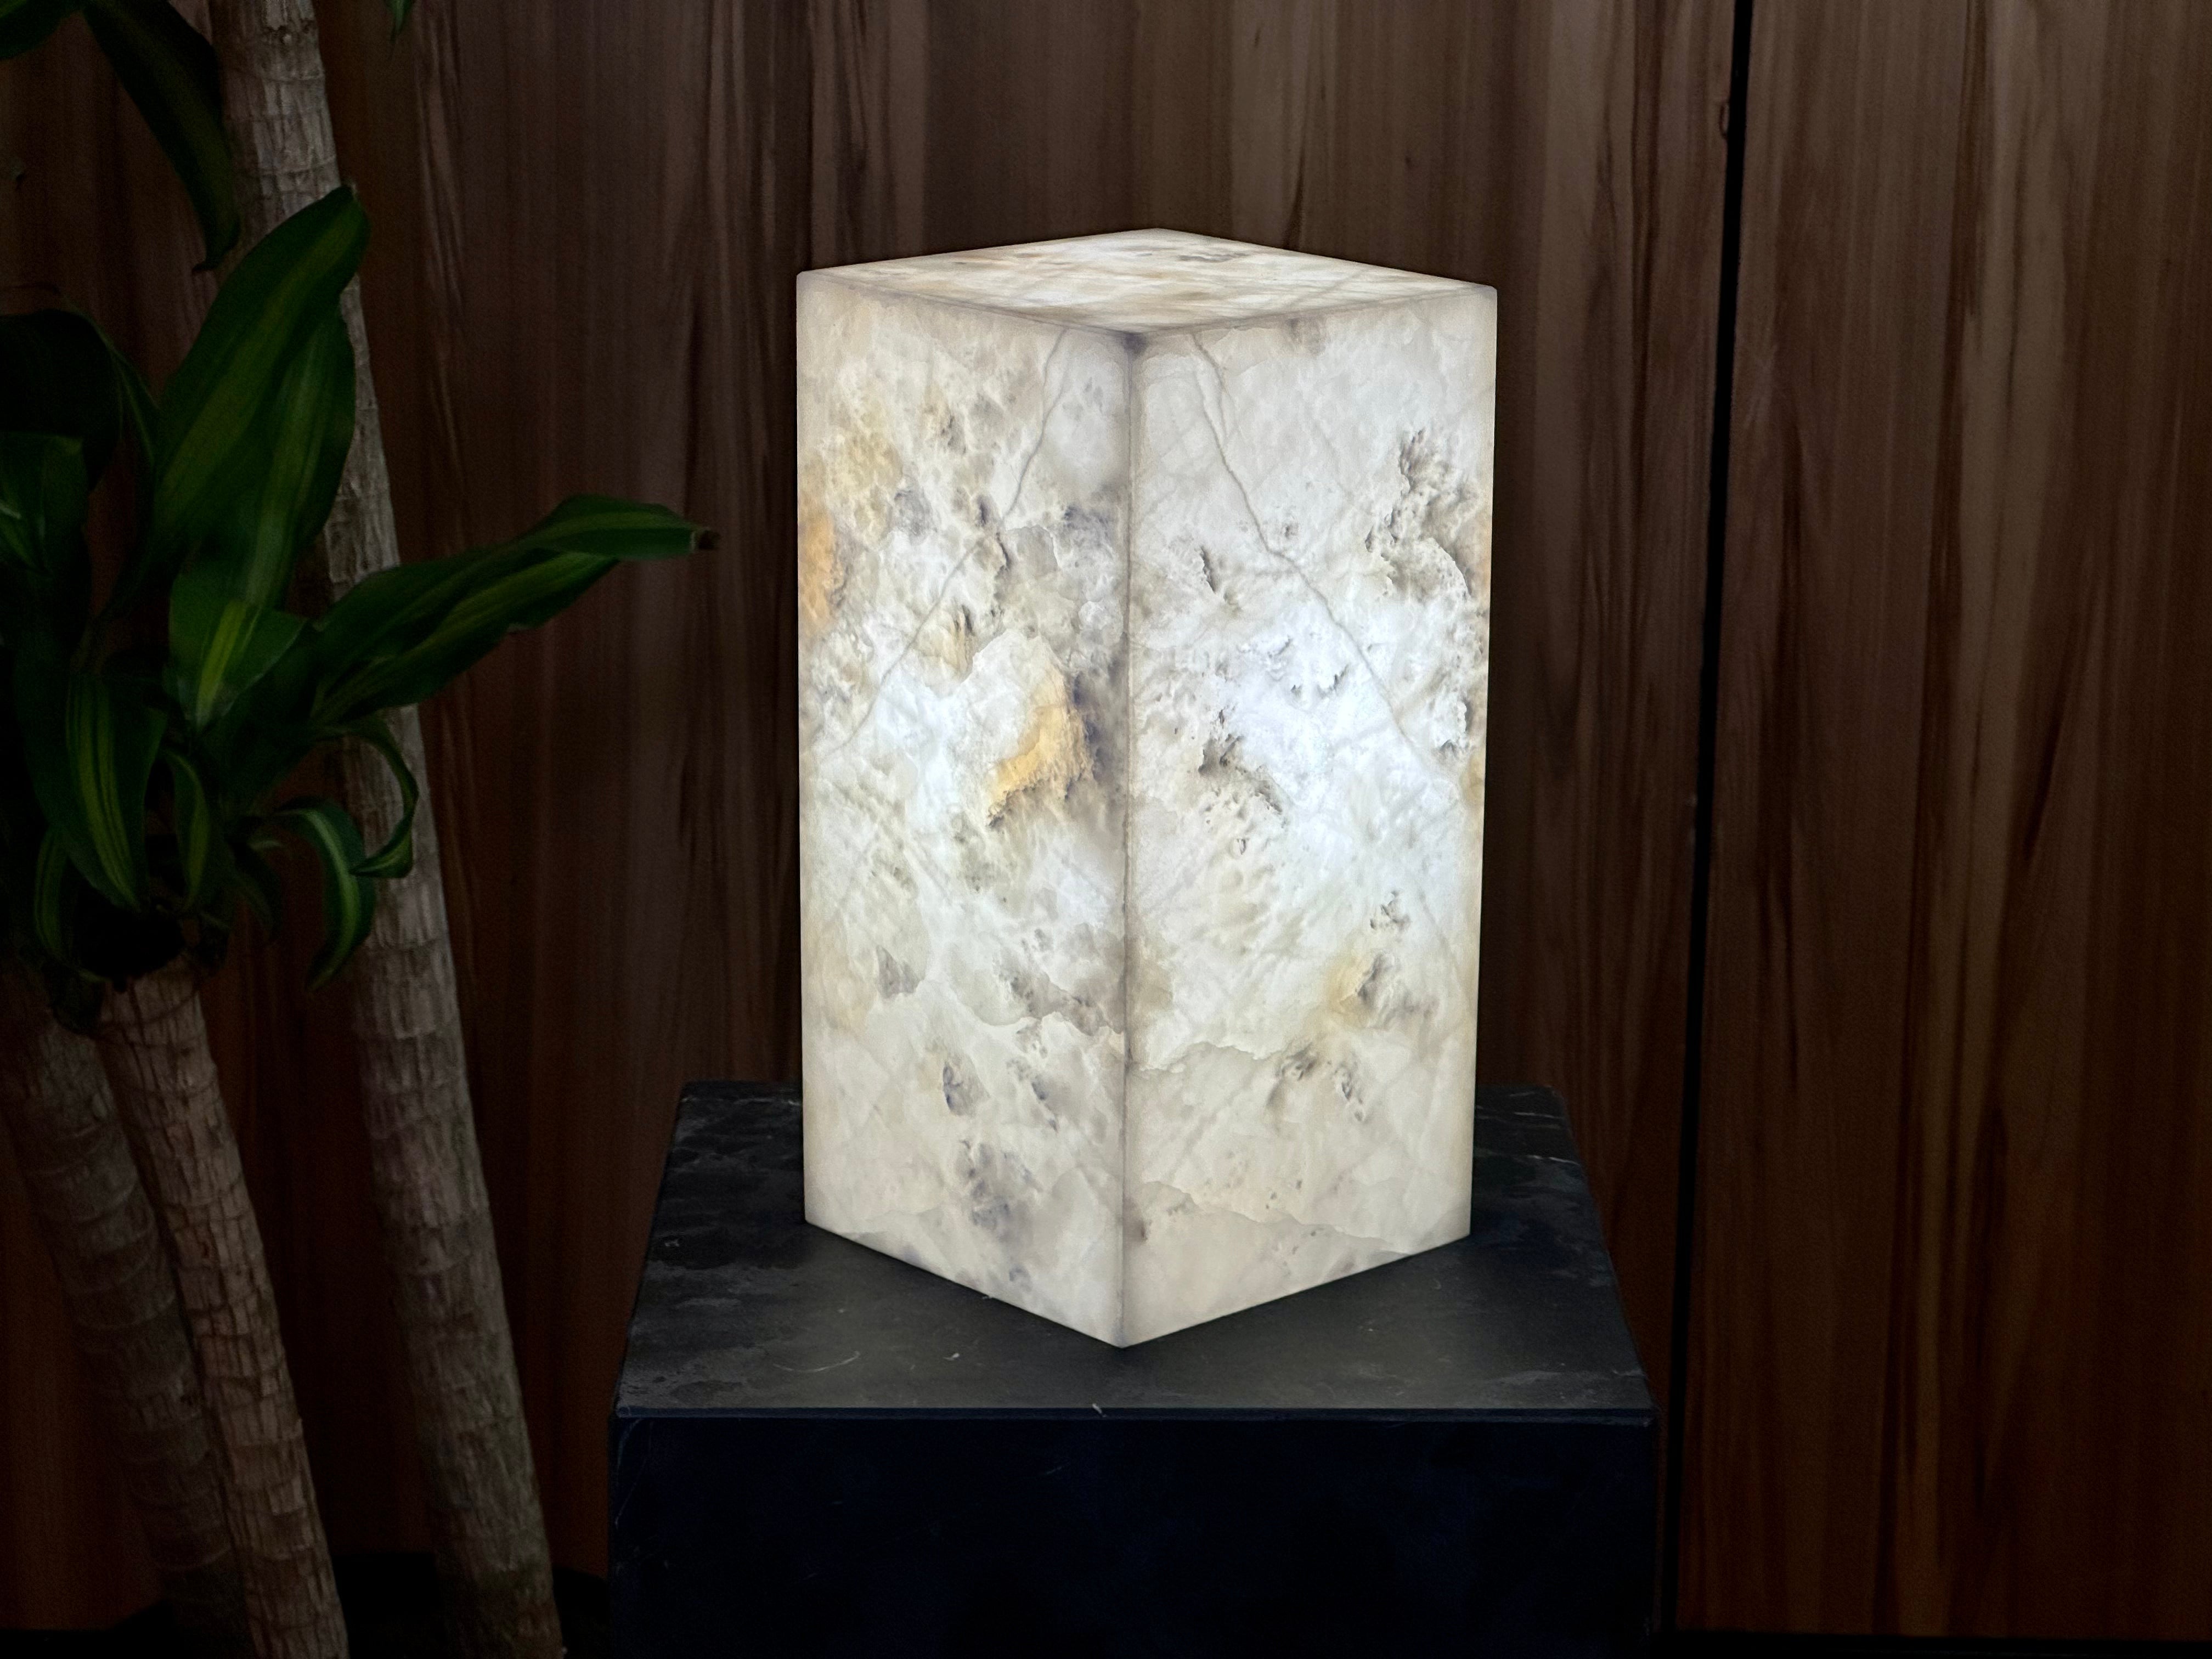 Designer Stone Lamps for Home Decor - Elevate your interior decor with handcrafted onyx lamps perfect for bedroom, living room or office.